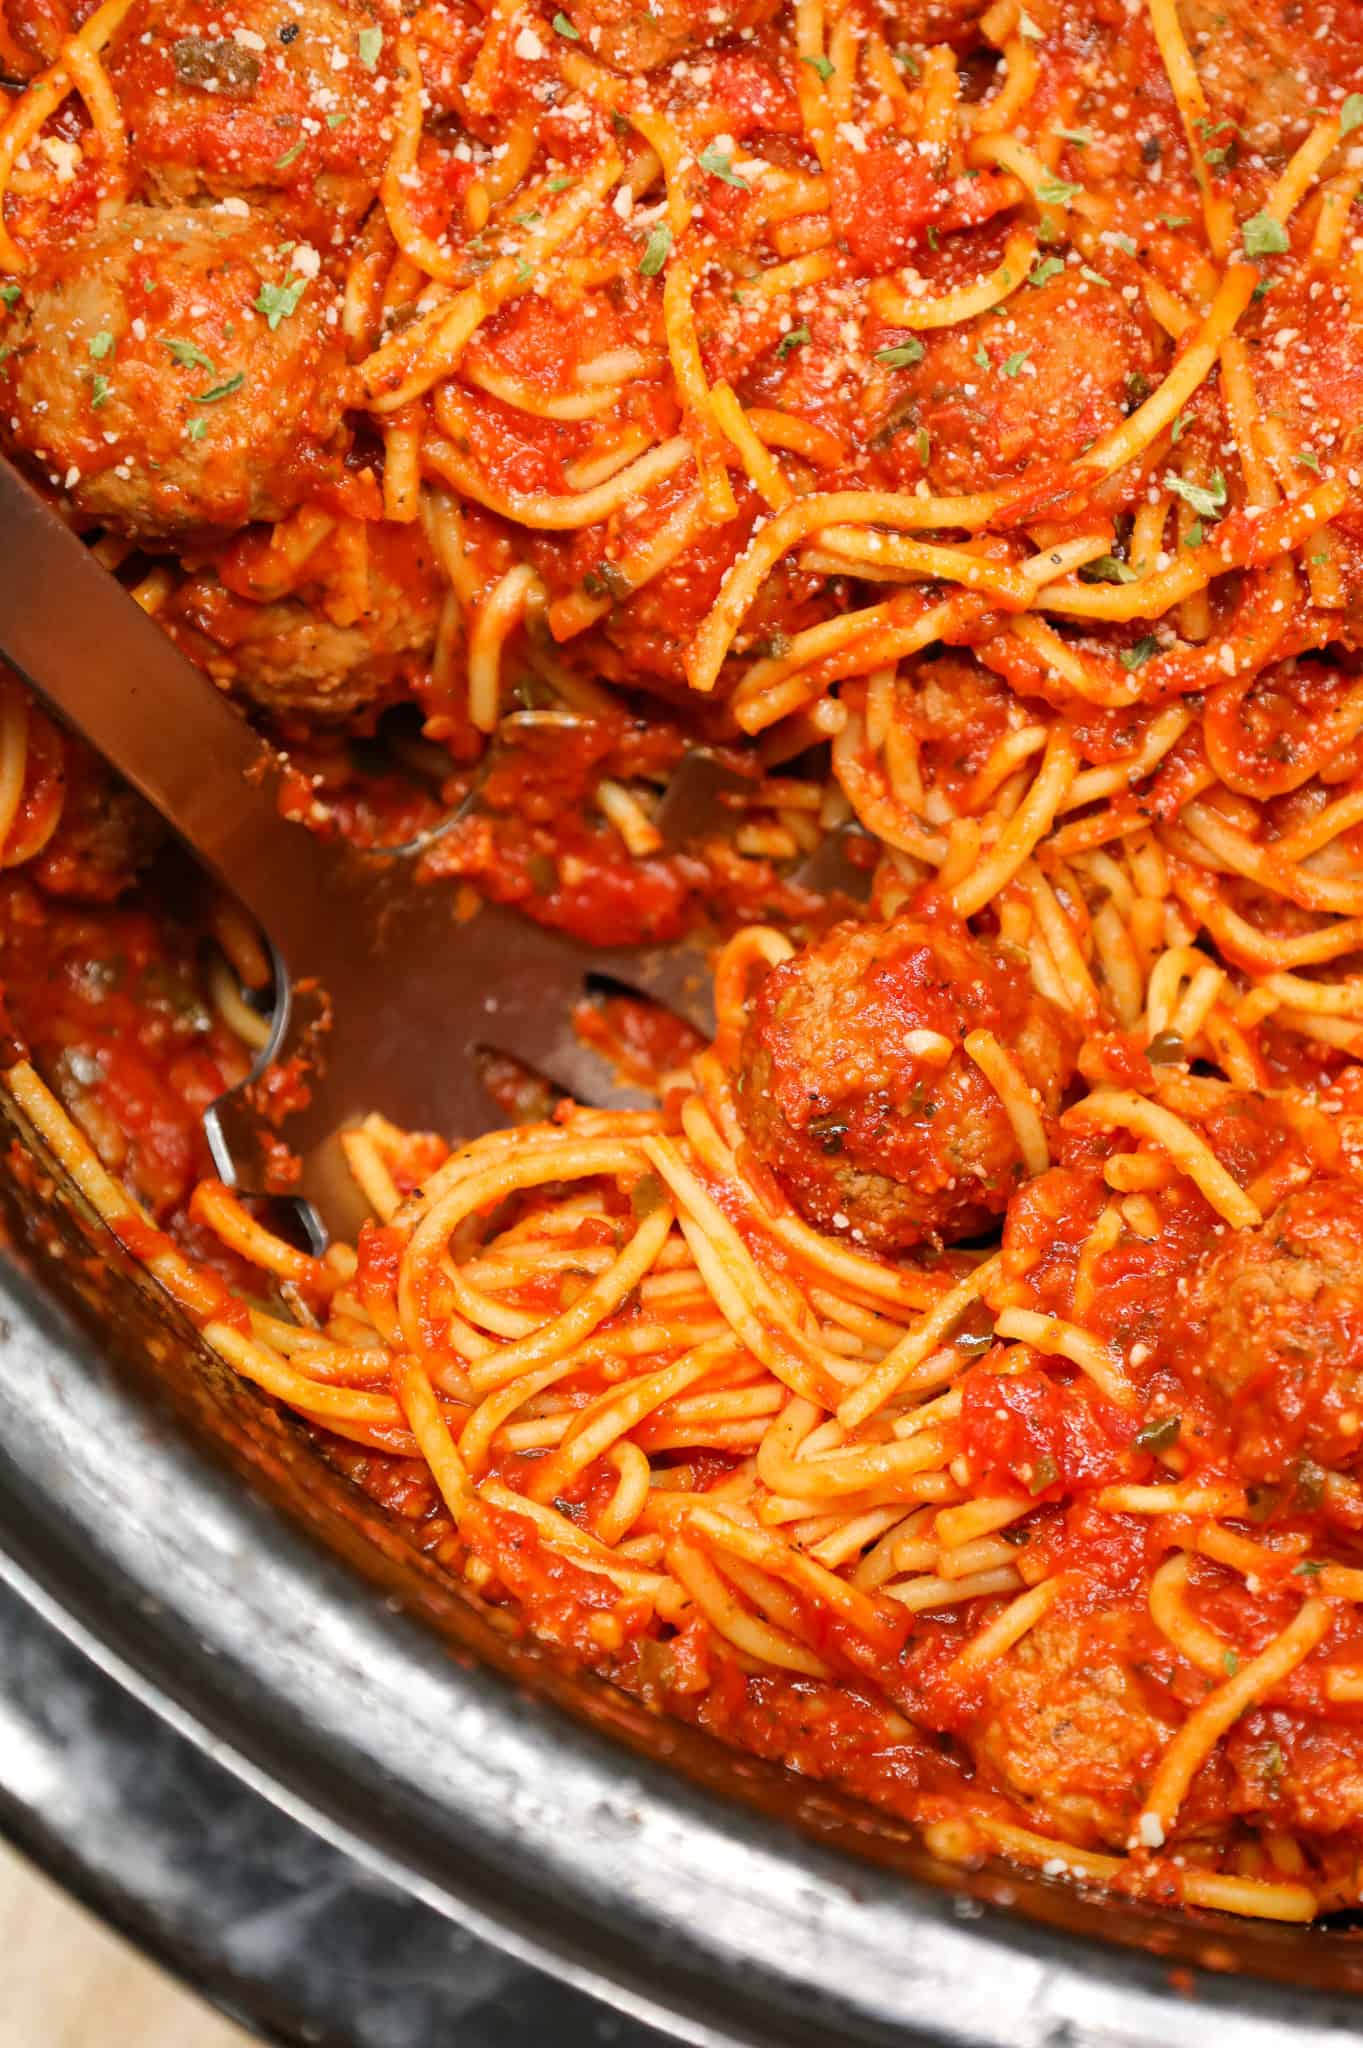 Crock Pot Spaghetti and Meatballs is an easy slow cooker dinner recipe made with frozen meatballs, marinara sauce, spaghetti and spices.